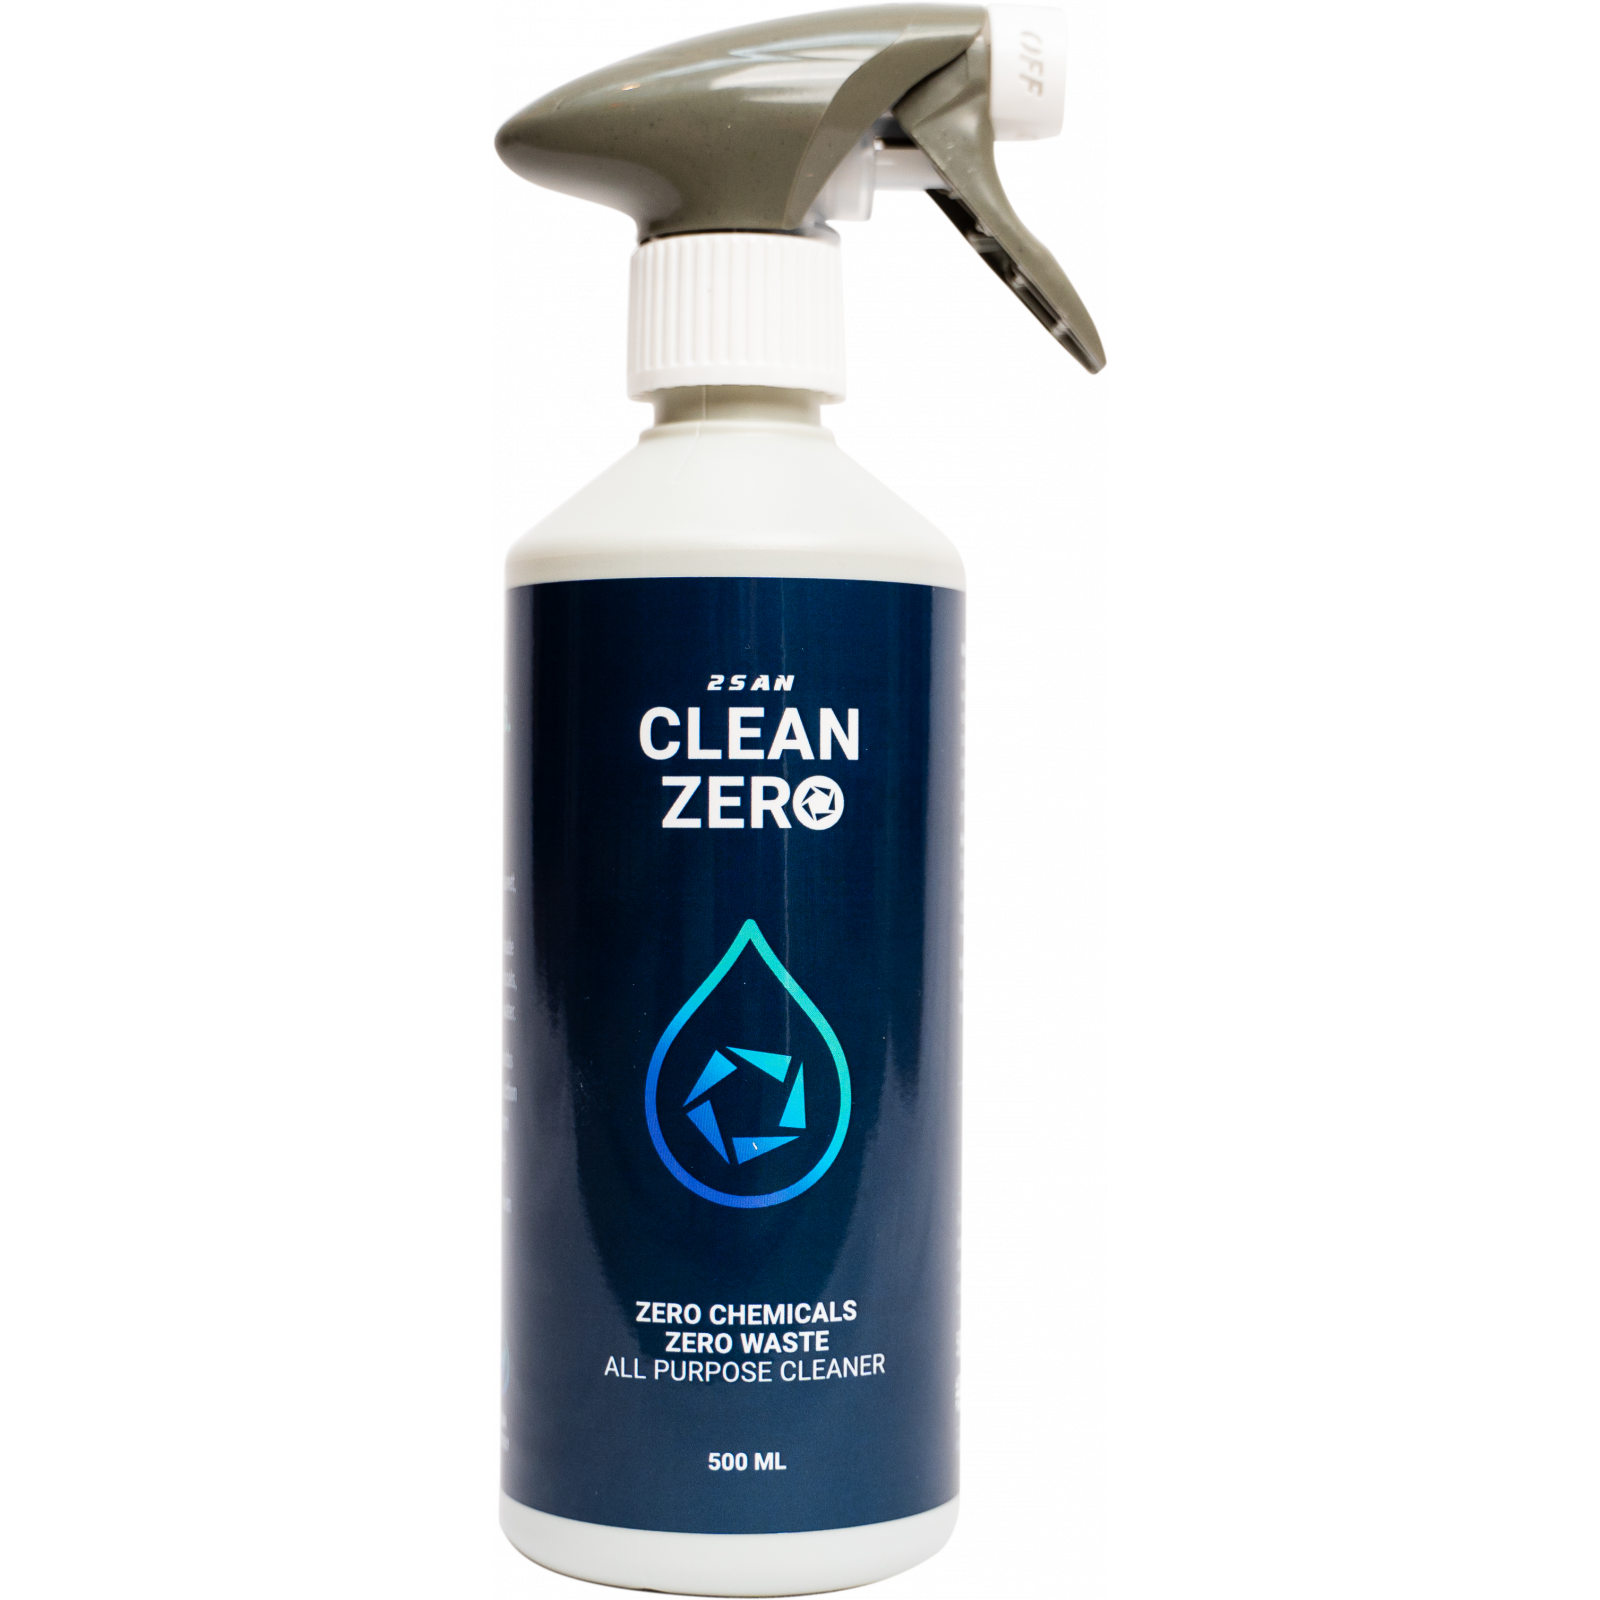 Clean Zero Chemical Free Cleaning Solution Trigger Spray, 500ml